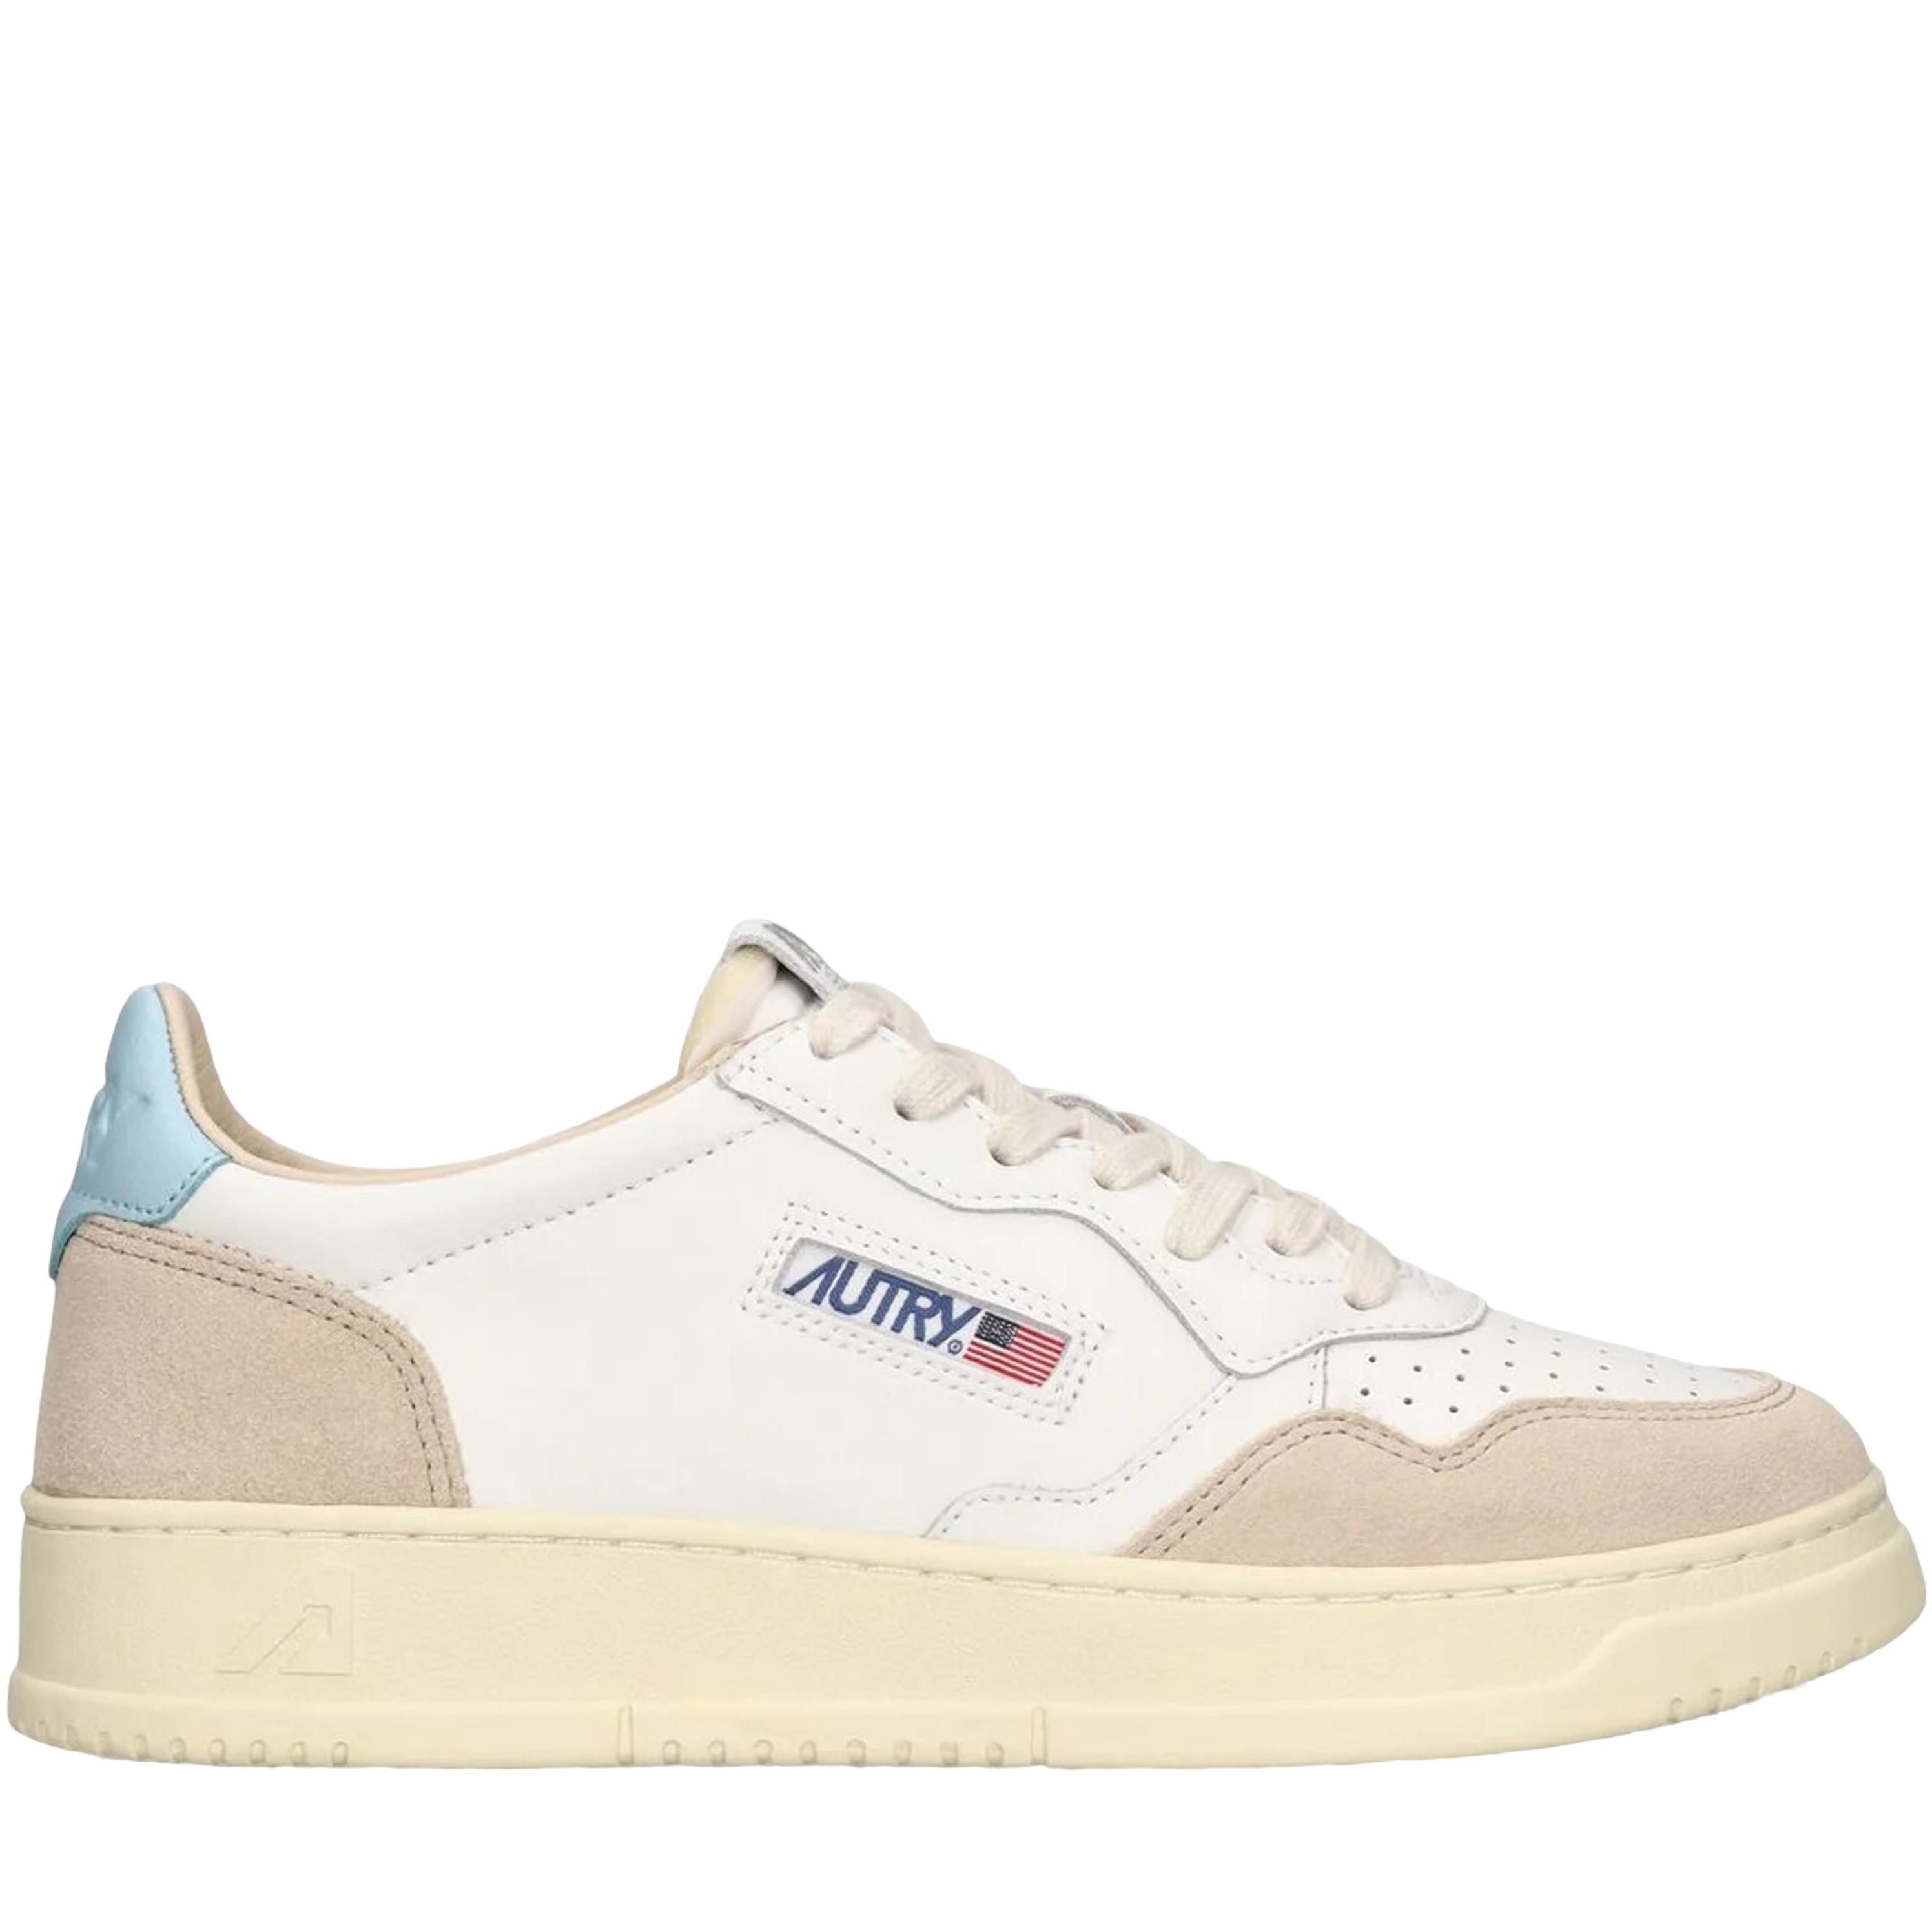 Autry donna sneakers basse AULW LS69 P24